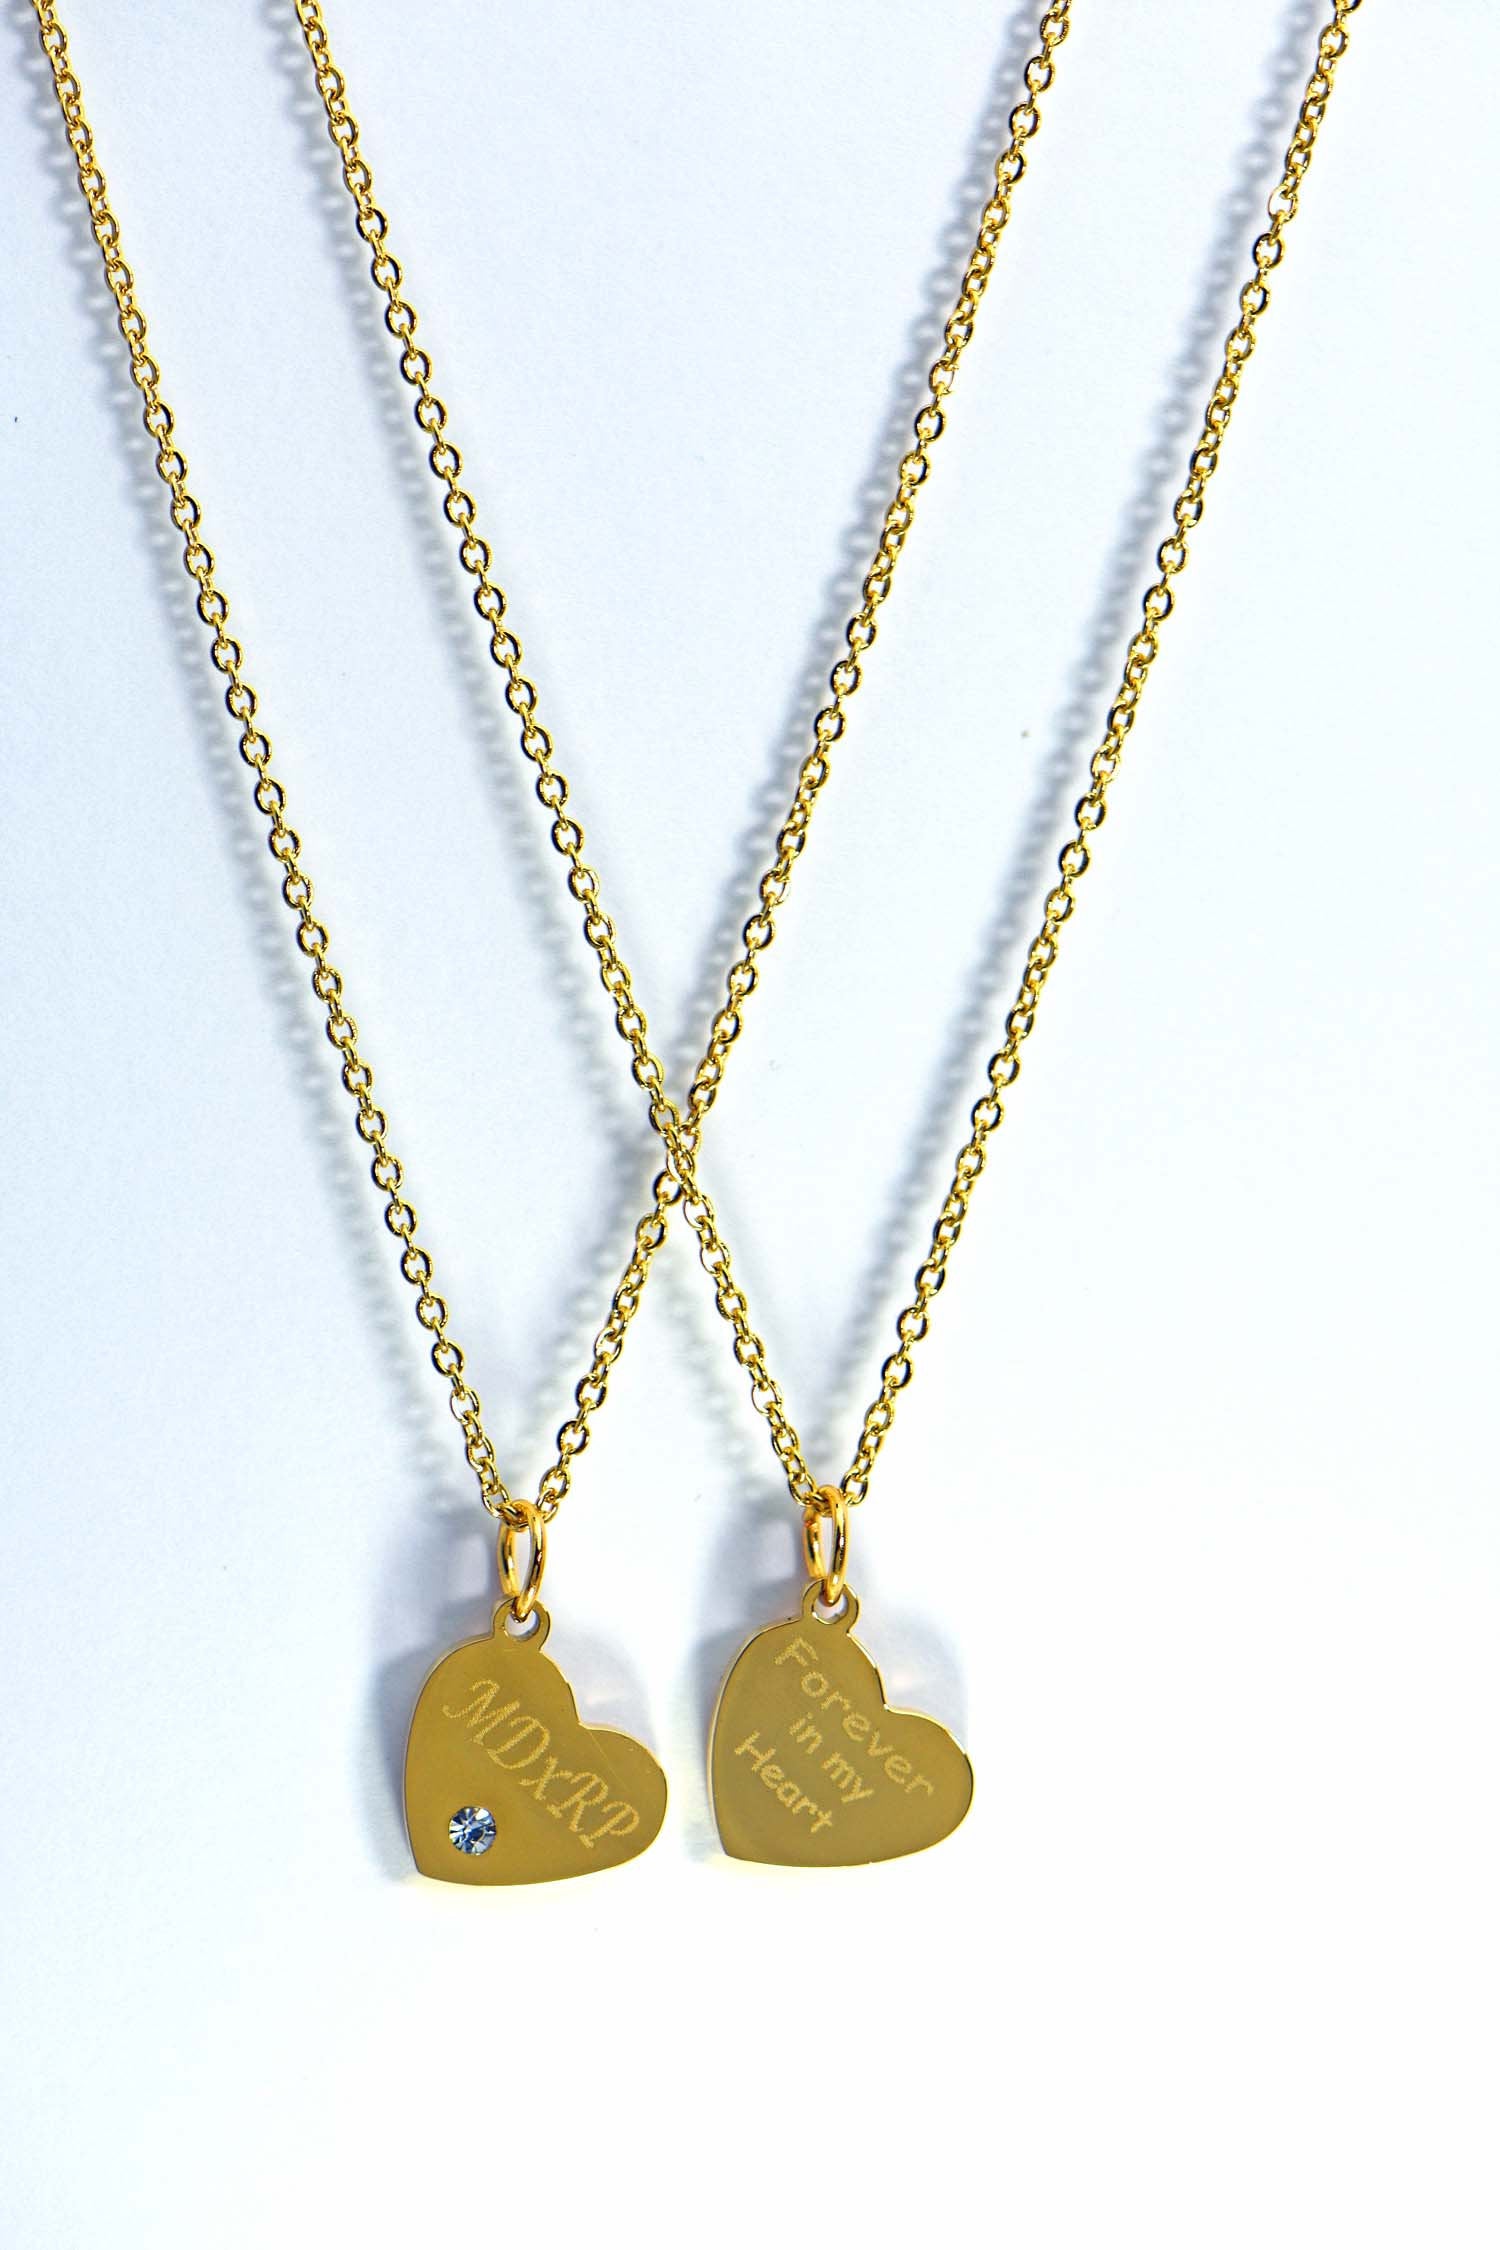 Birthstone heart charm necklace, Personalized Heart Necklace, Custom Text, Name Initial, Gold Filled, Monogram Engraved Mini Heart gift - Anya Collection